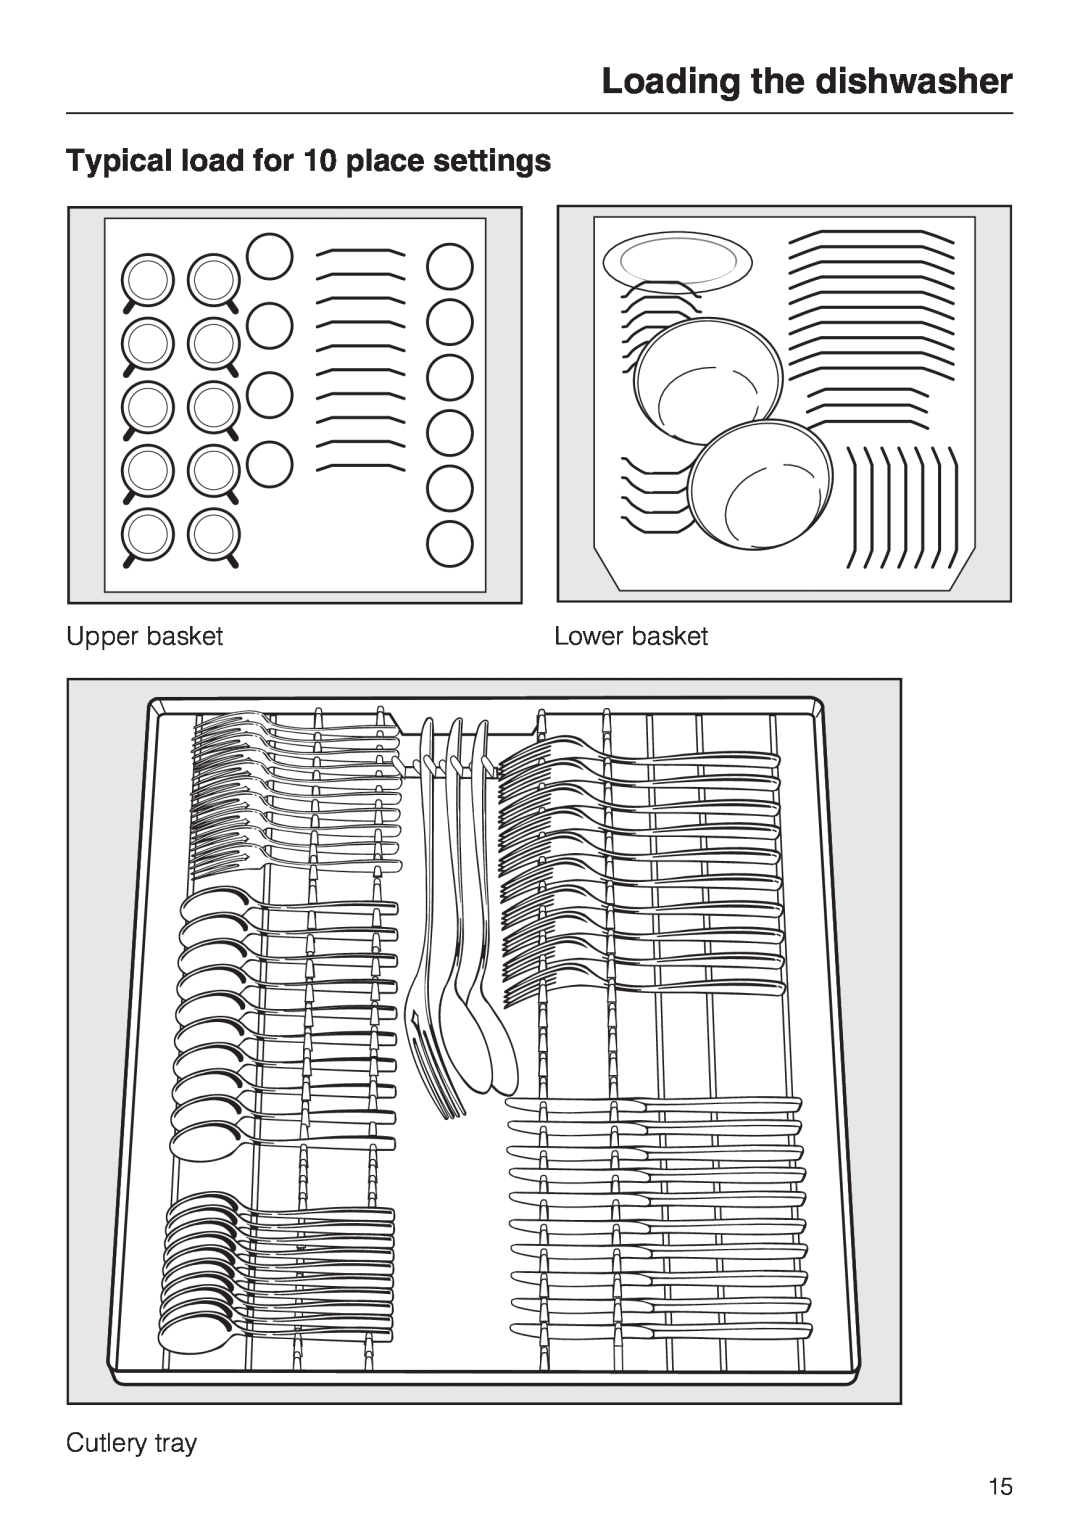 Miele G 4205 Typical load for 10 place settings, Loading the dishwasher, Upper basket, Lower basket, Cutlery tray 